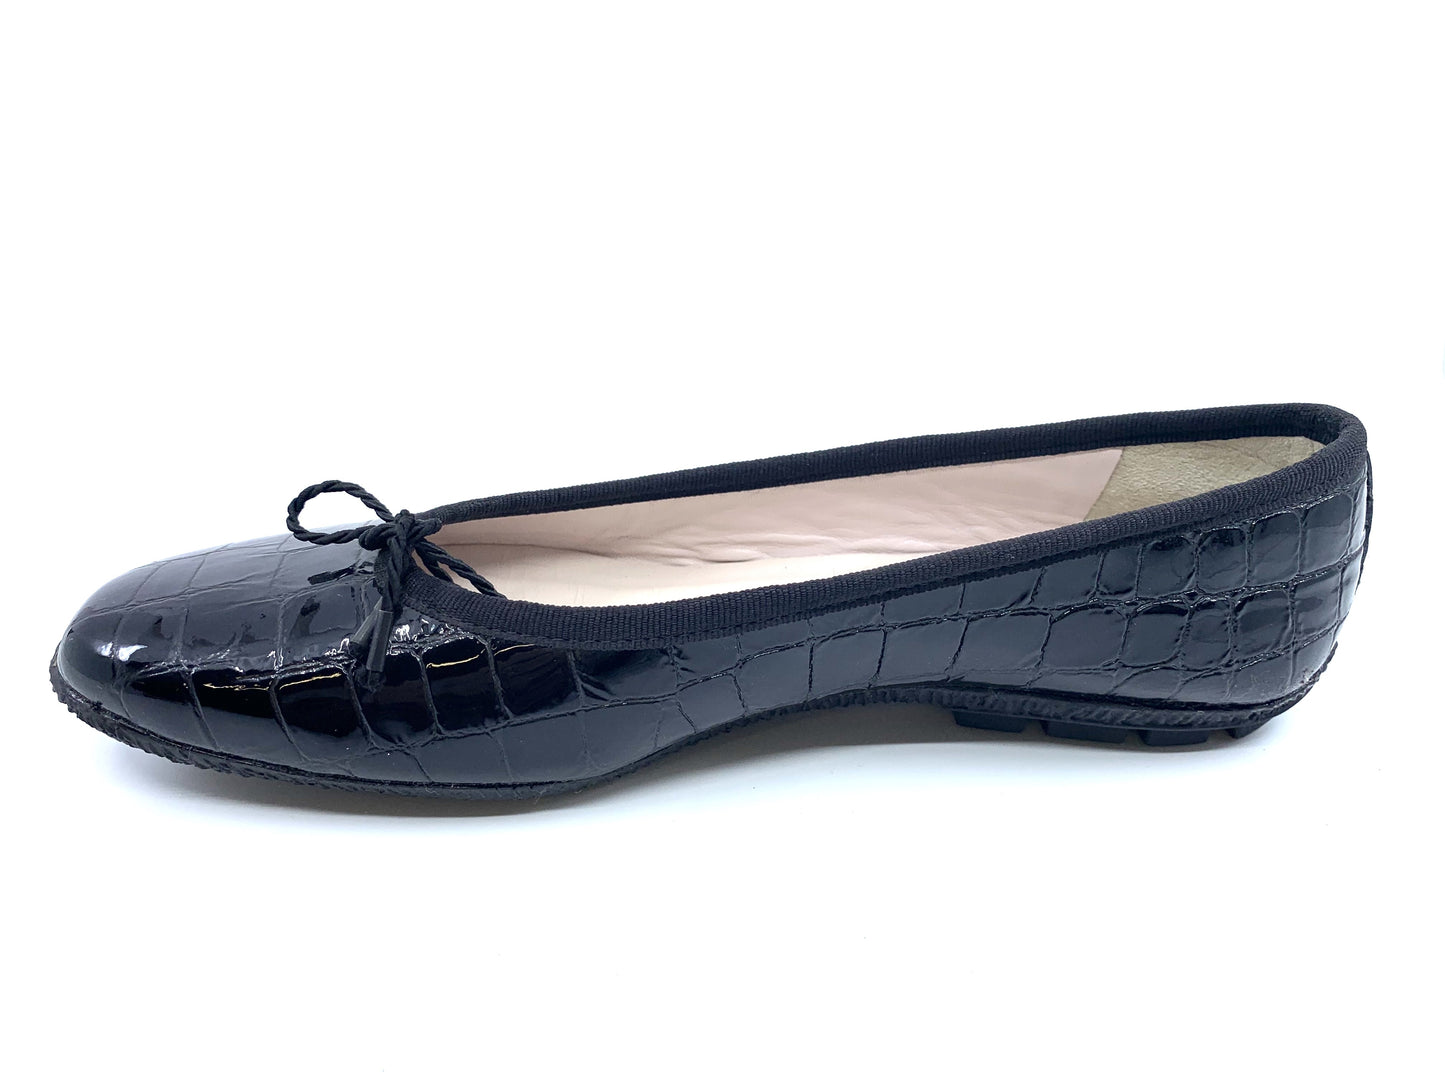 Country Black Crocodile Patent Leather Paul Mayer Ballet Flats